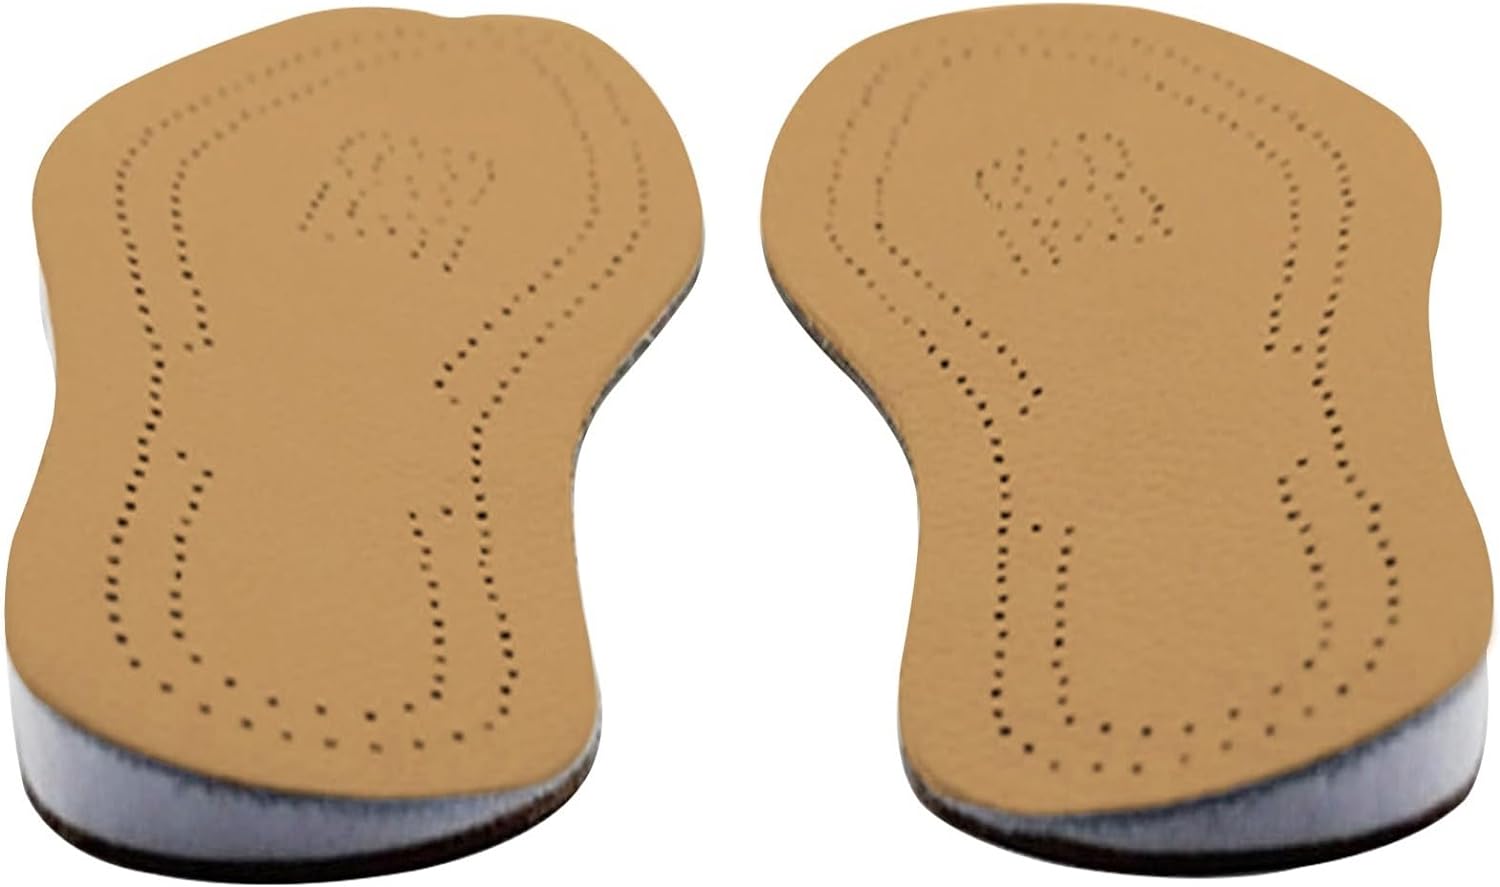 Supination Insoles,O/XO Leg Orthopedic Corrective Brown Insoles,for Foot Alignment,Metatarsalgia,Bow Legs,Posture Improve,Pronation Correction Insoles for Men and Women(Color: Supination,Size: 41/42)